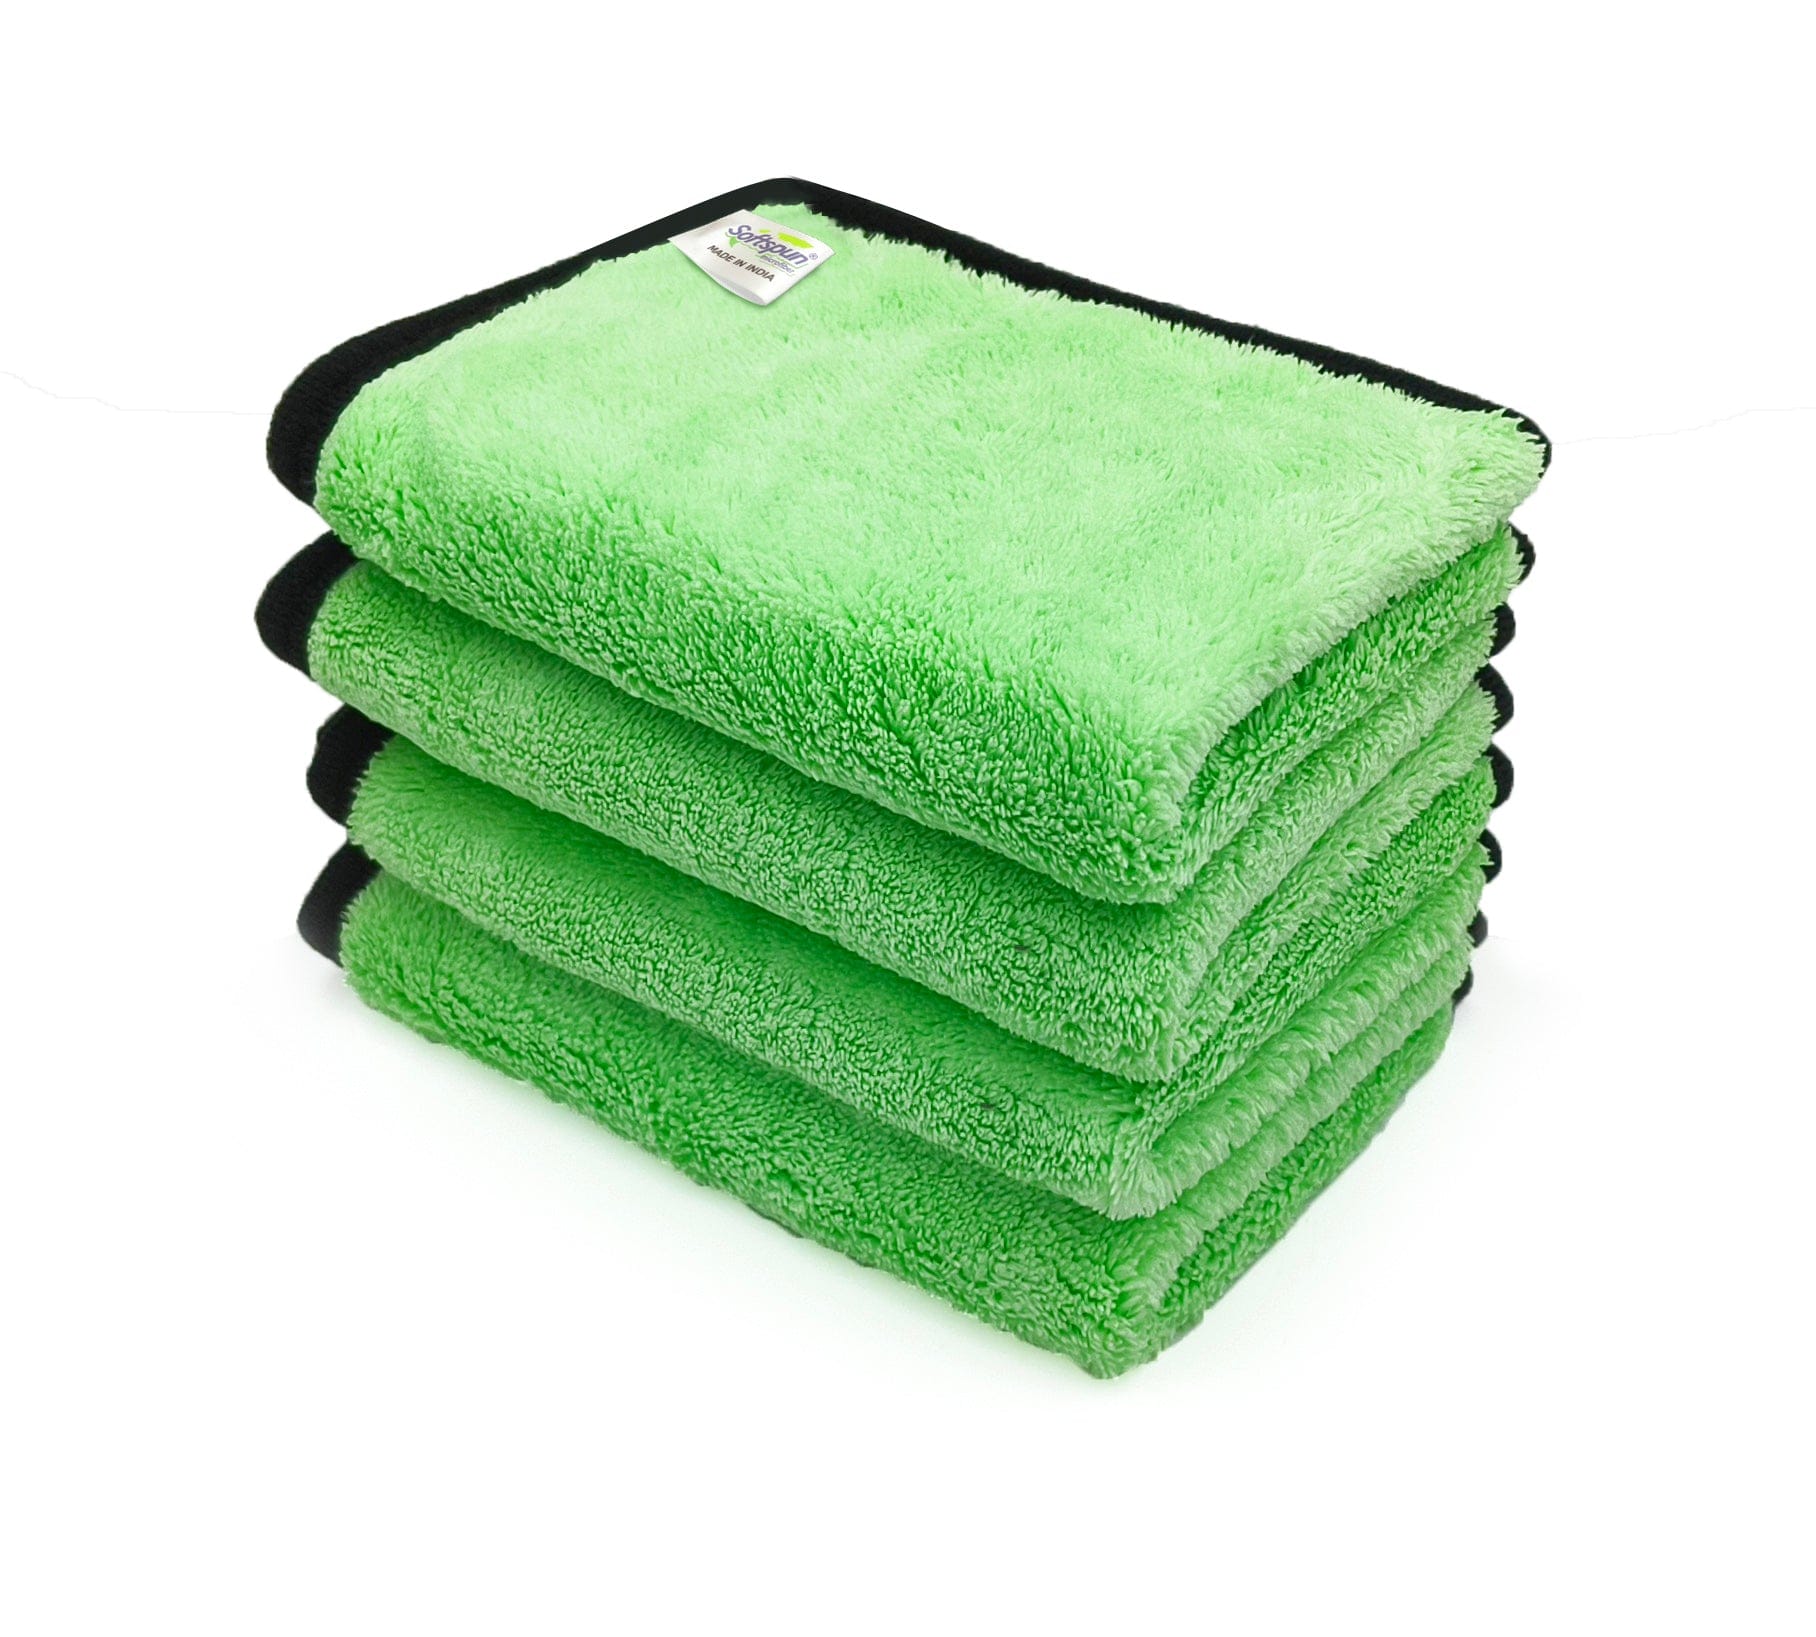 SOFTSPUN Microfiber Baby Hand & Face Wipes 20x30 Cms, 4 Piece Towel Set, 280 GSM , Super Soft & Silky for Hand, Face and Body - Hypoallergenic Sensitive Skin Wipes & Washcloths.